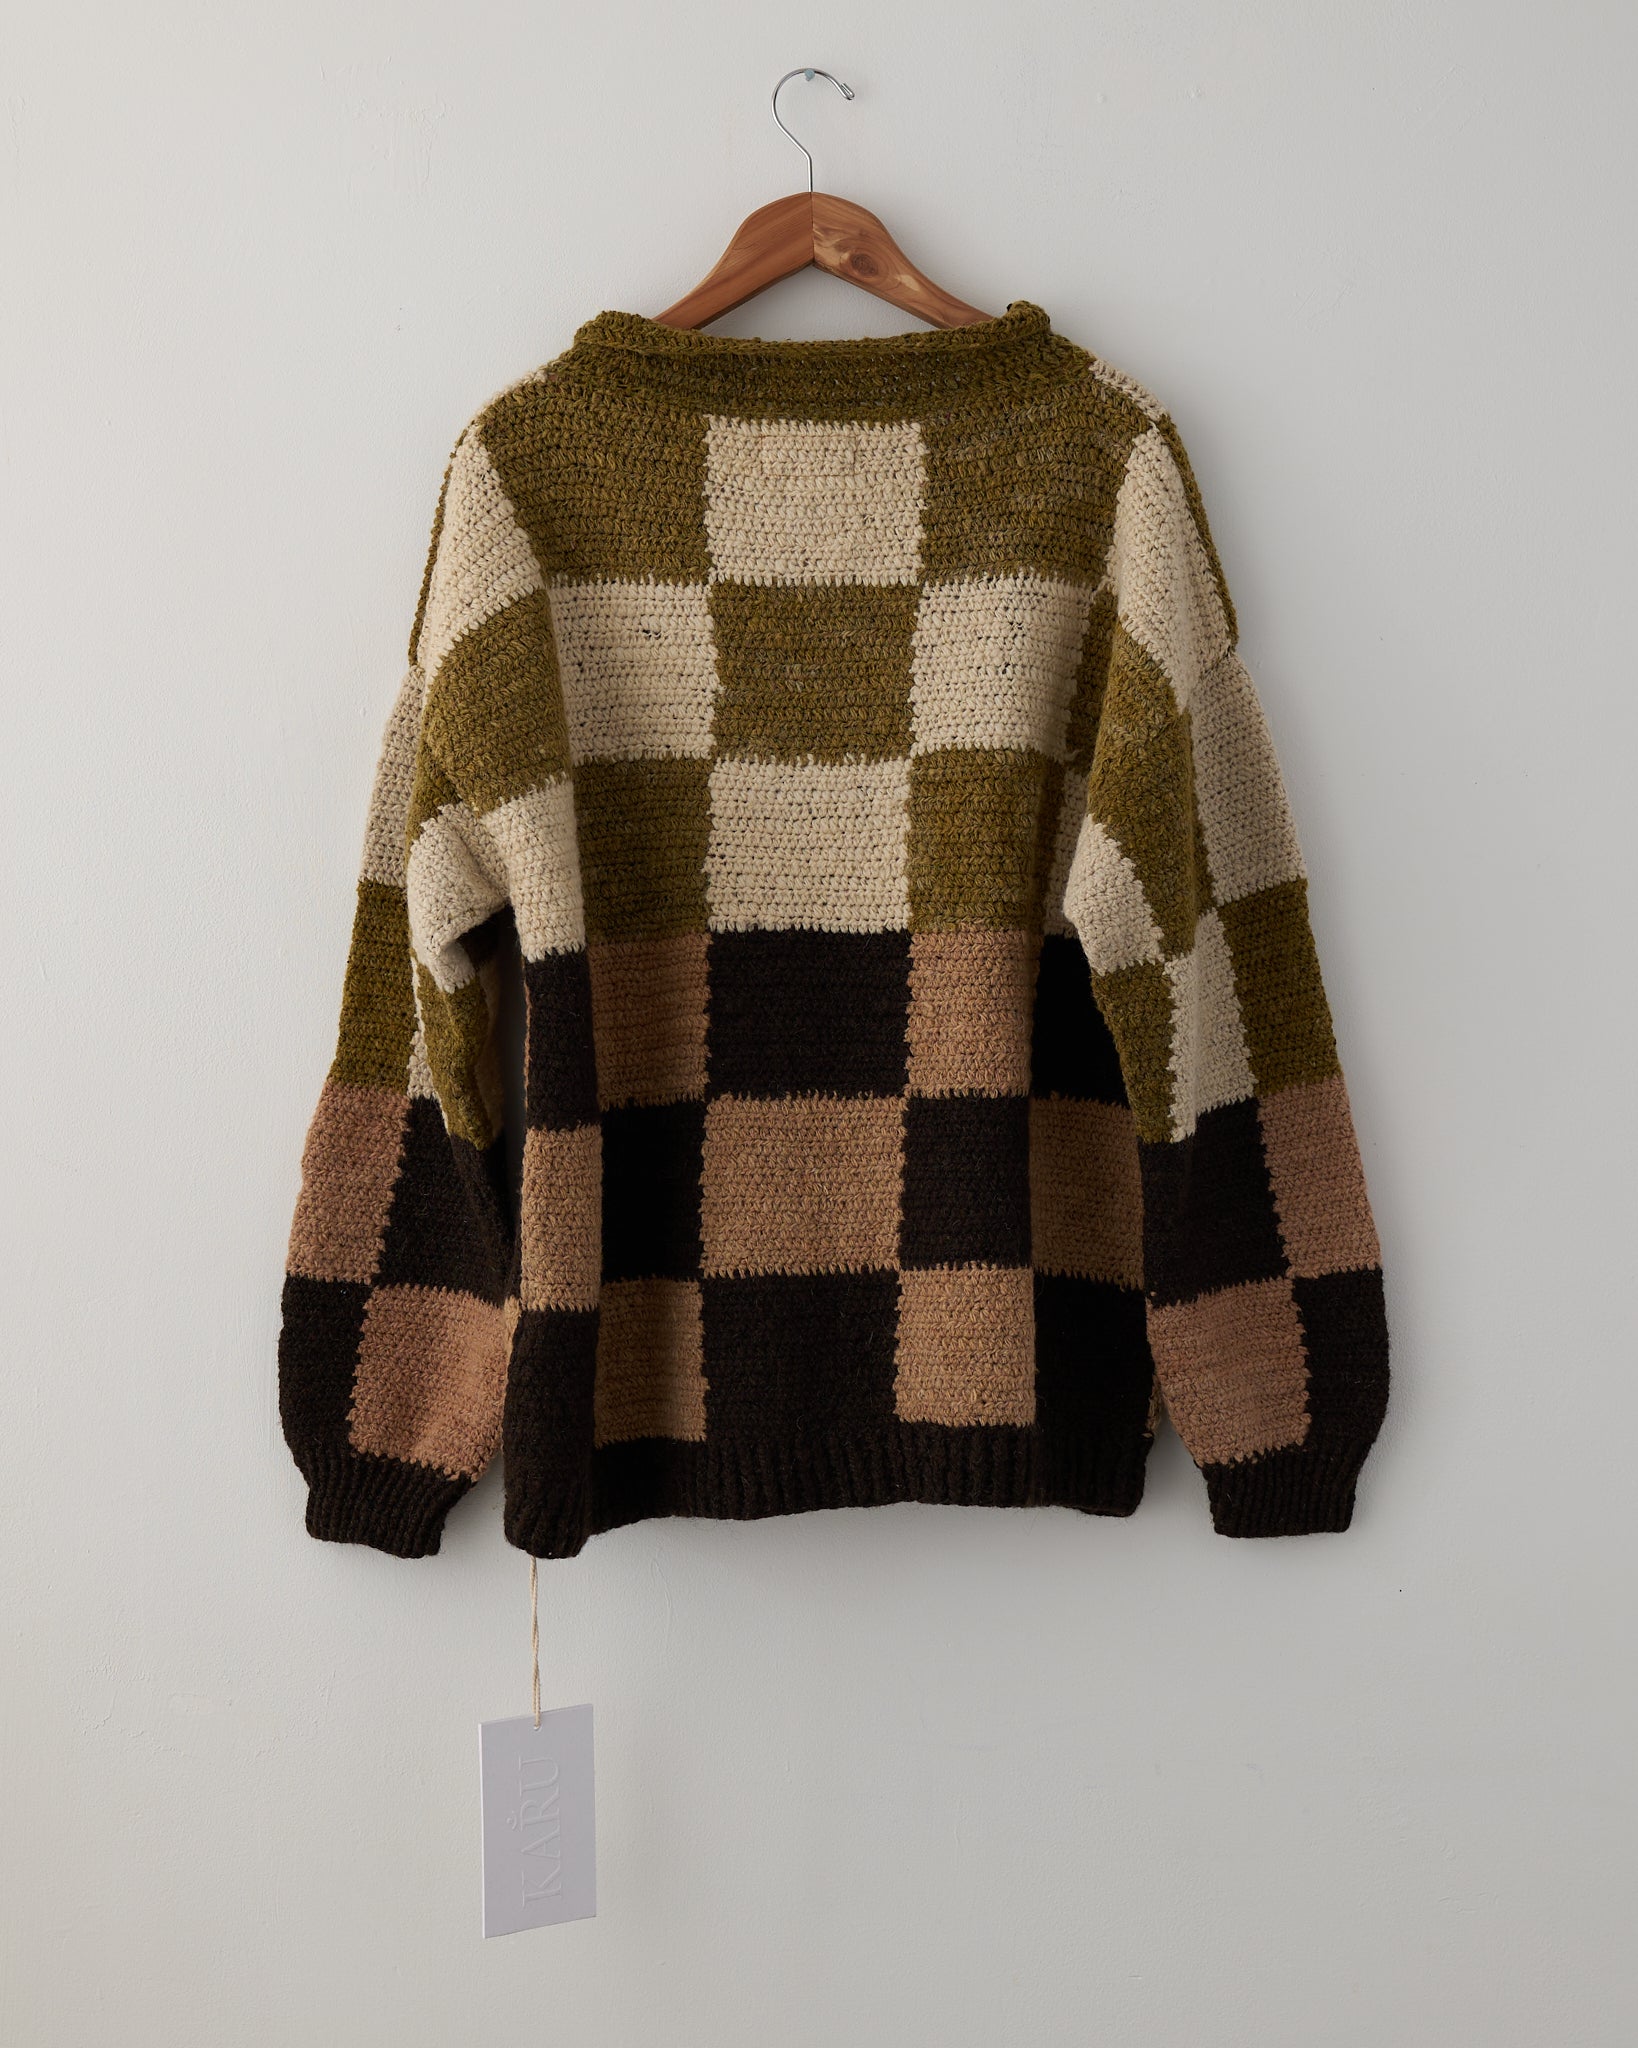 Rugby Sweater, Wool Knitted Check